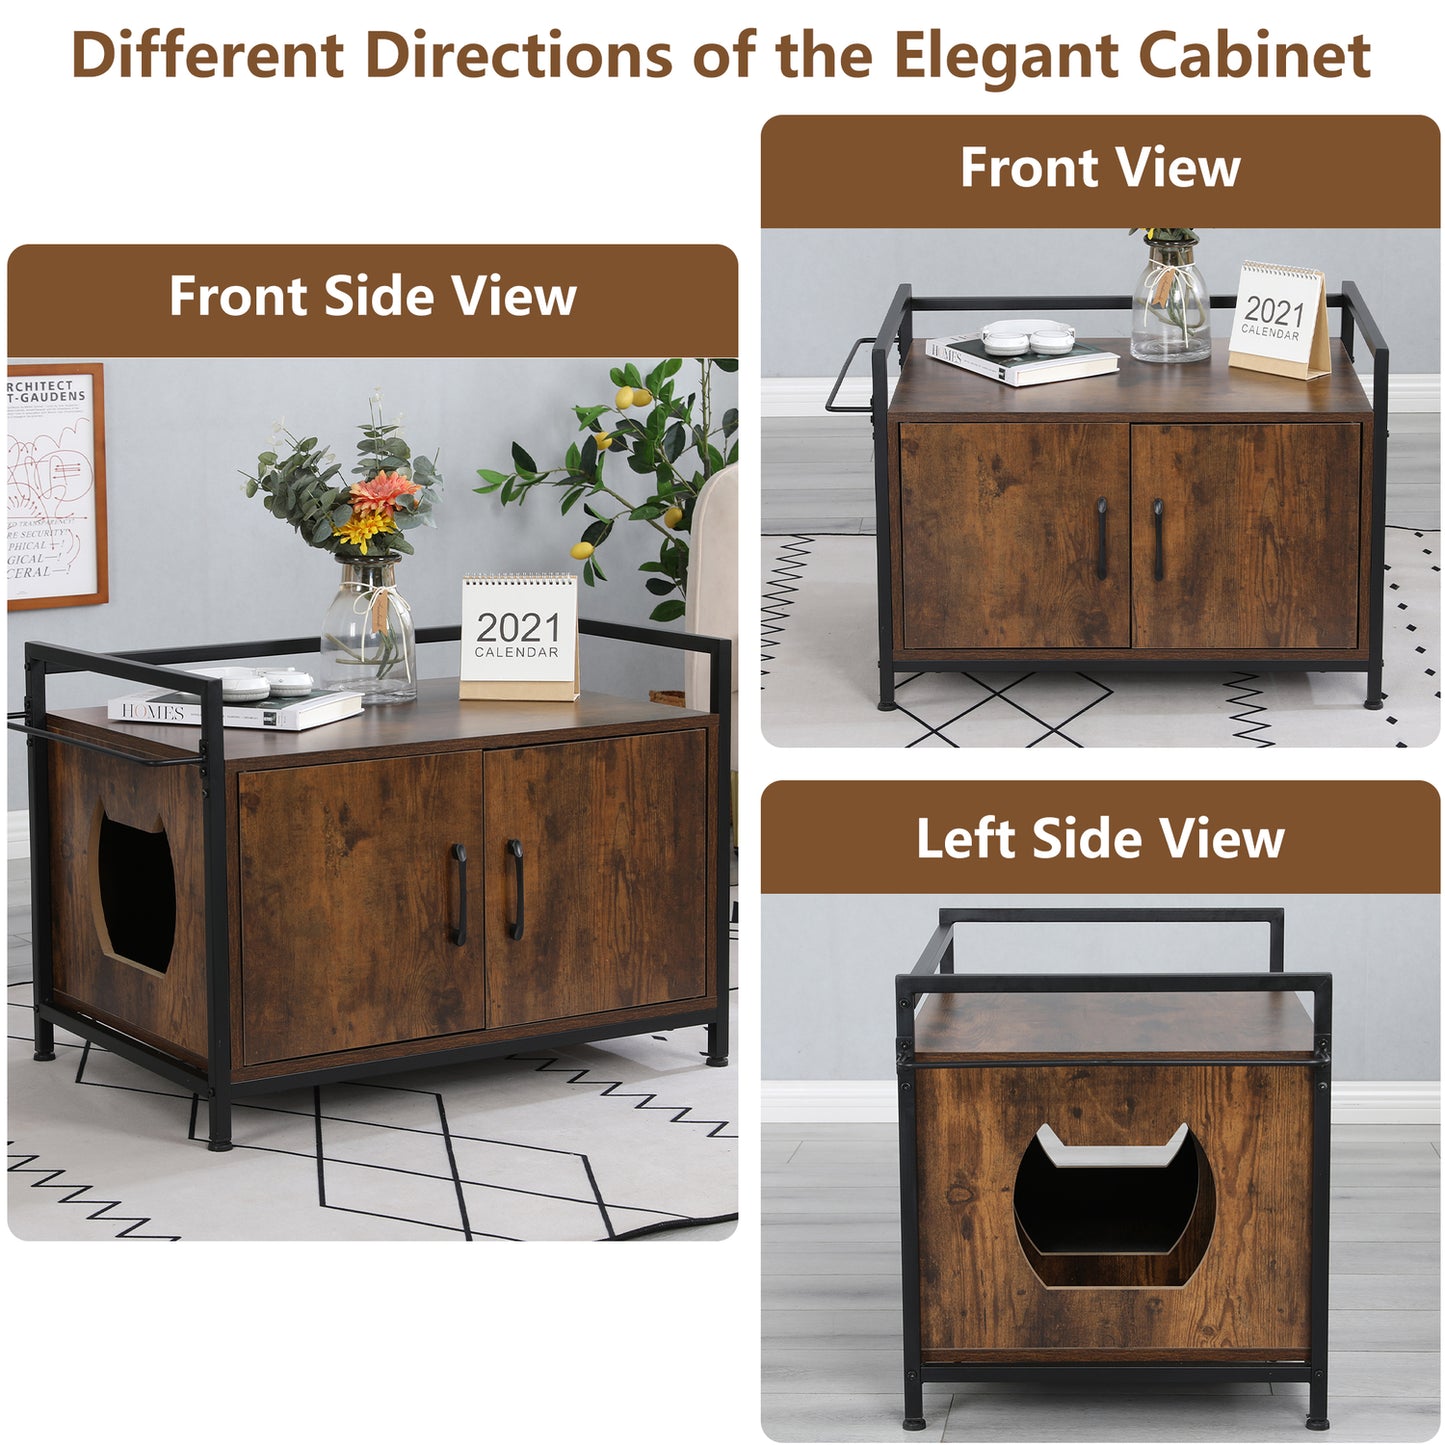 Cat Litter Box Furniture Hidden, Cat Washroom Storage Bench Enclosure Litter Box House with Table, Bedroom Nightstand, Big Enough for Automatic Litter Box or Two Litter Boxes, Rustic Brown